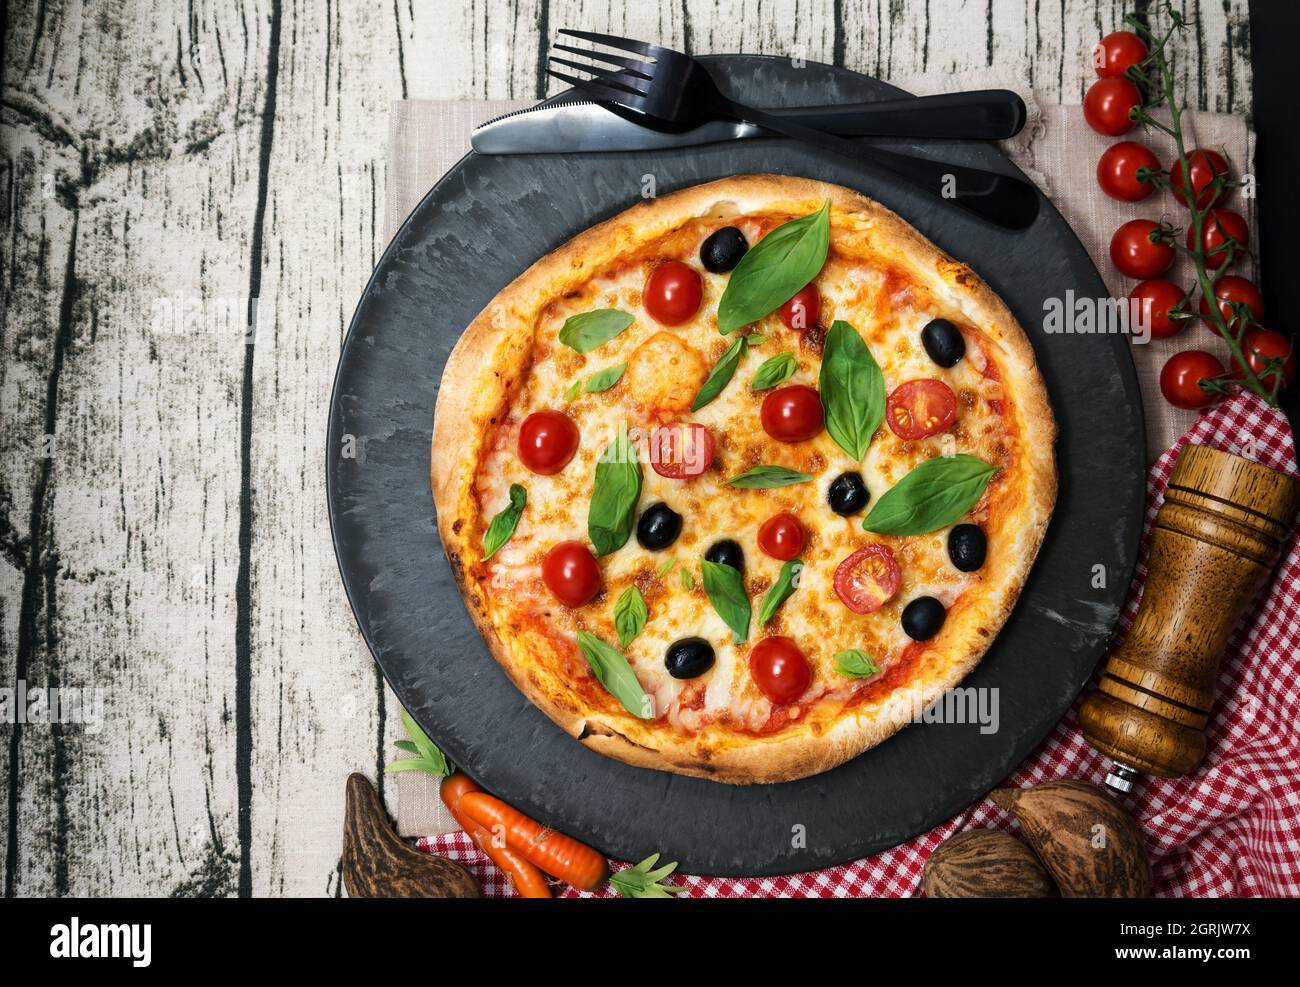 High Angle View Of Pizza In Plate On Table Stock Photo